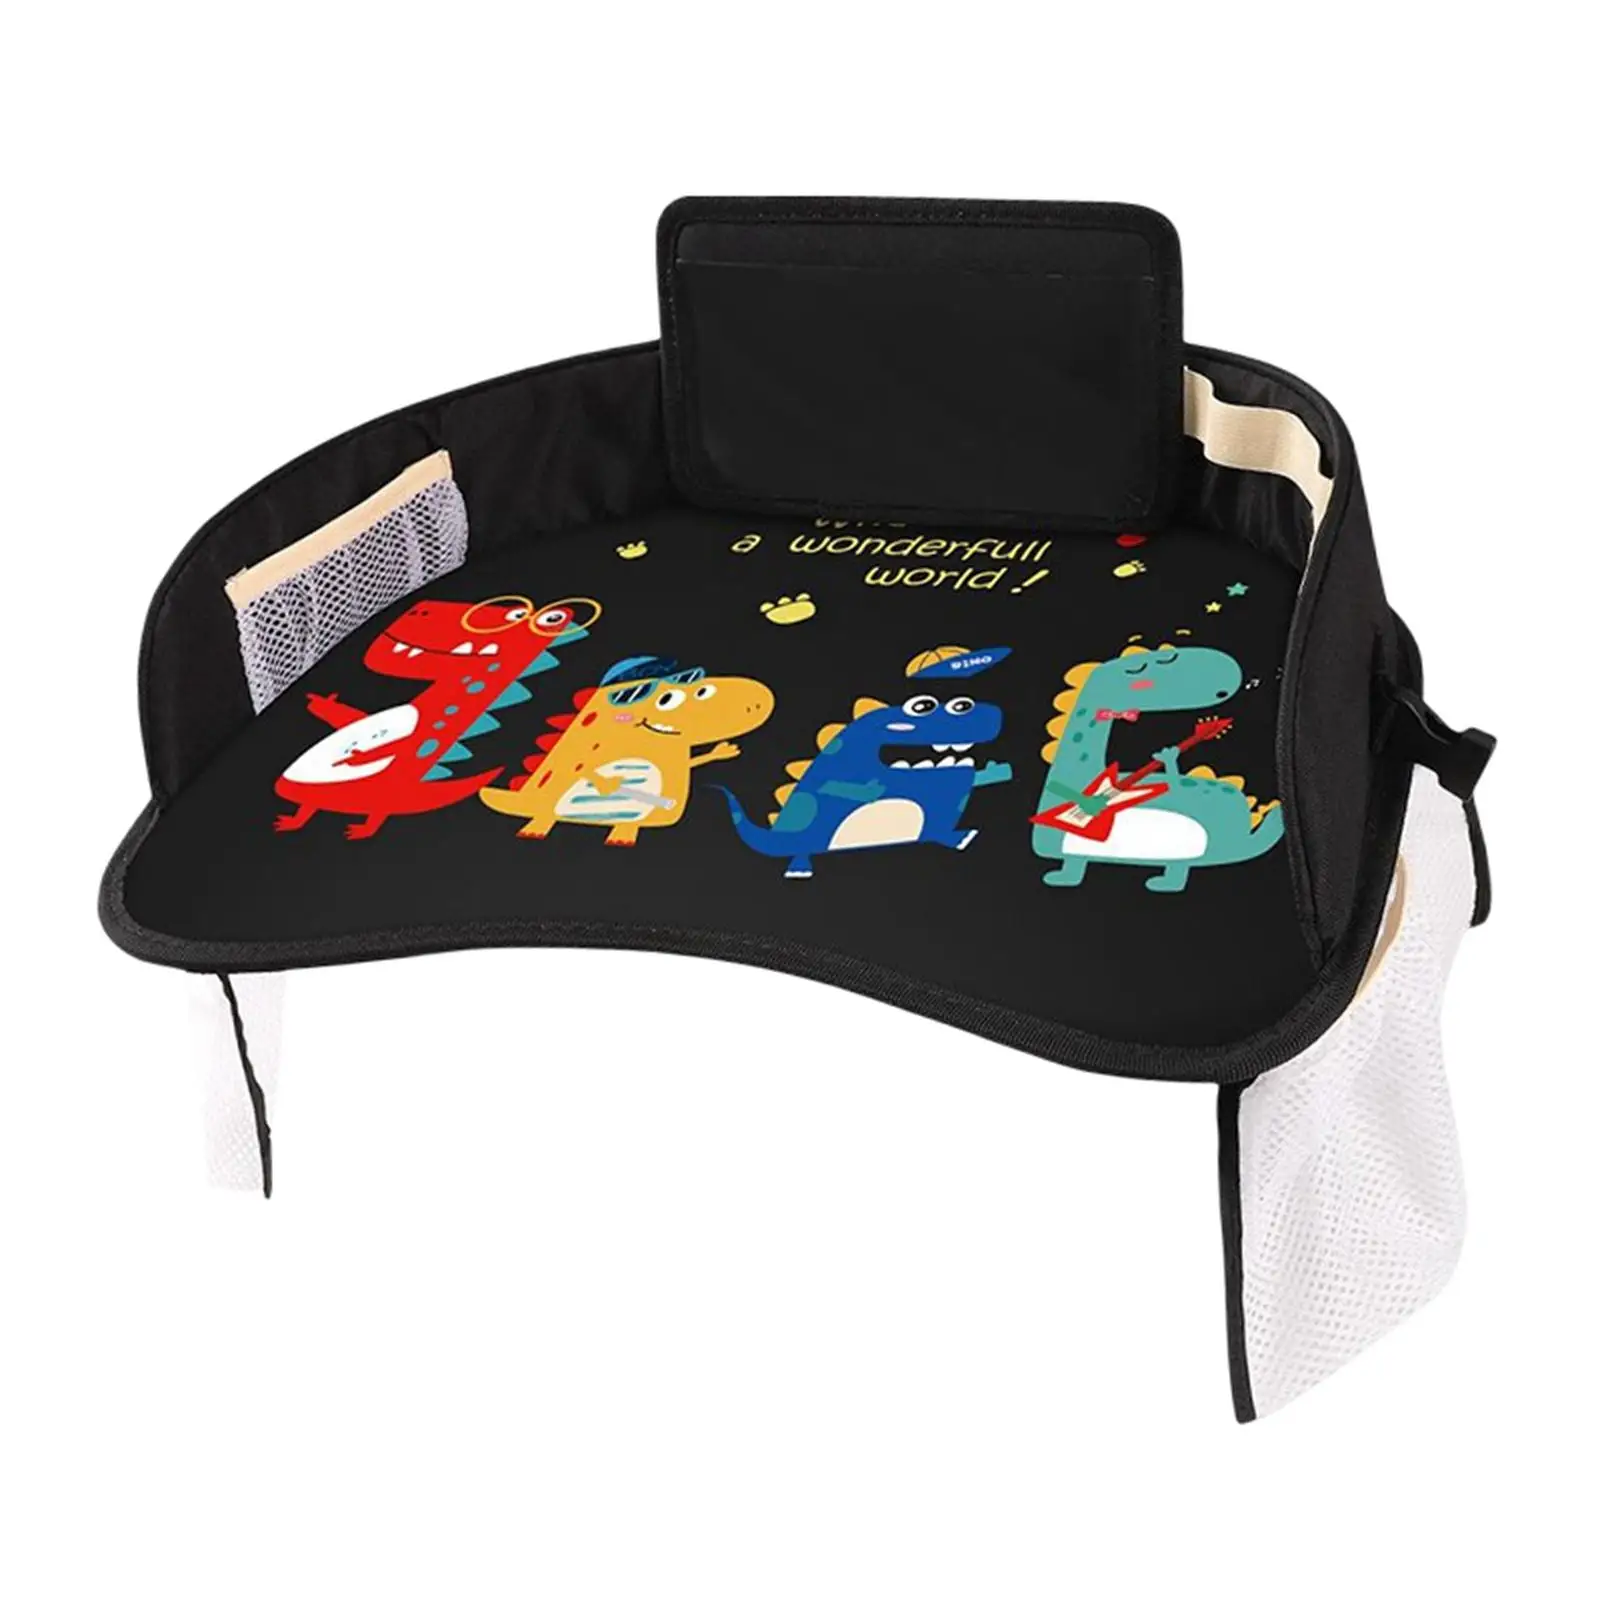 Kids Eating Drawing Snack Activity Tray Toddler Car Seat Lap Tray for Toddler